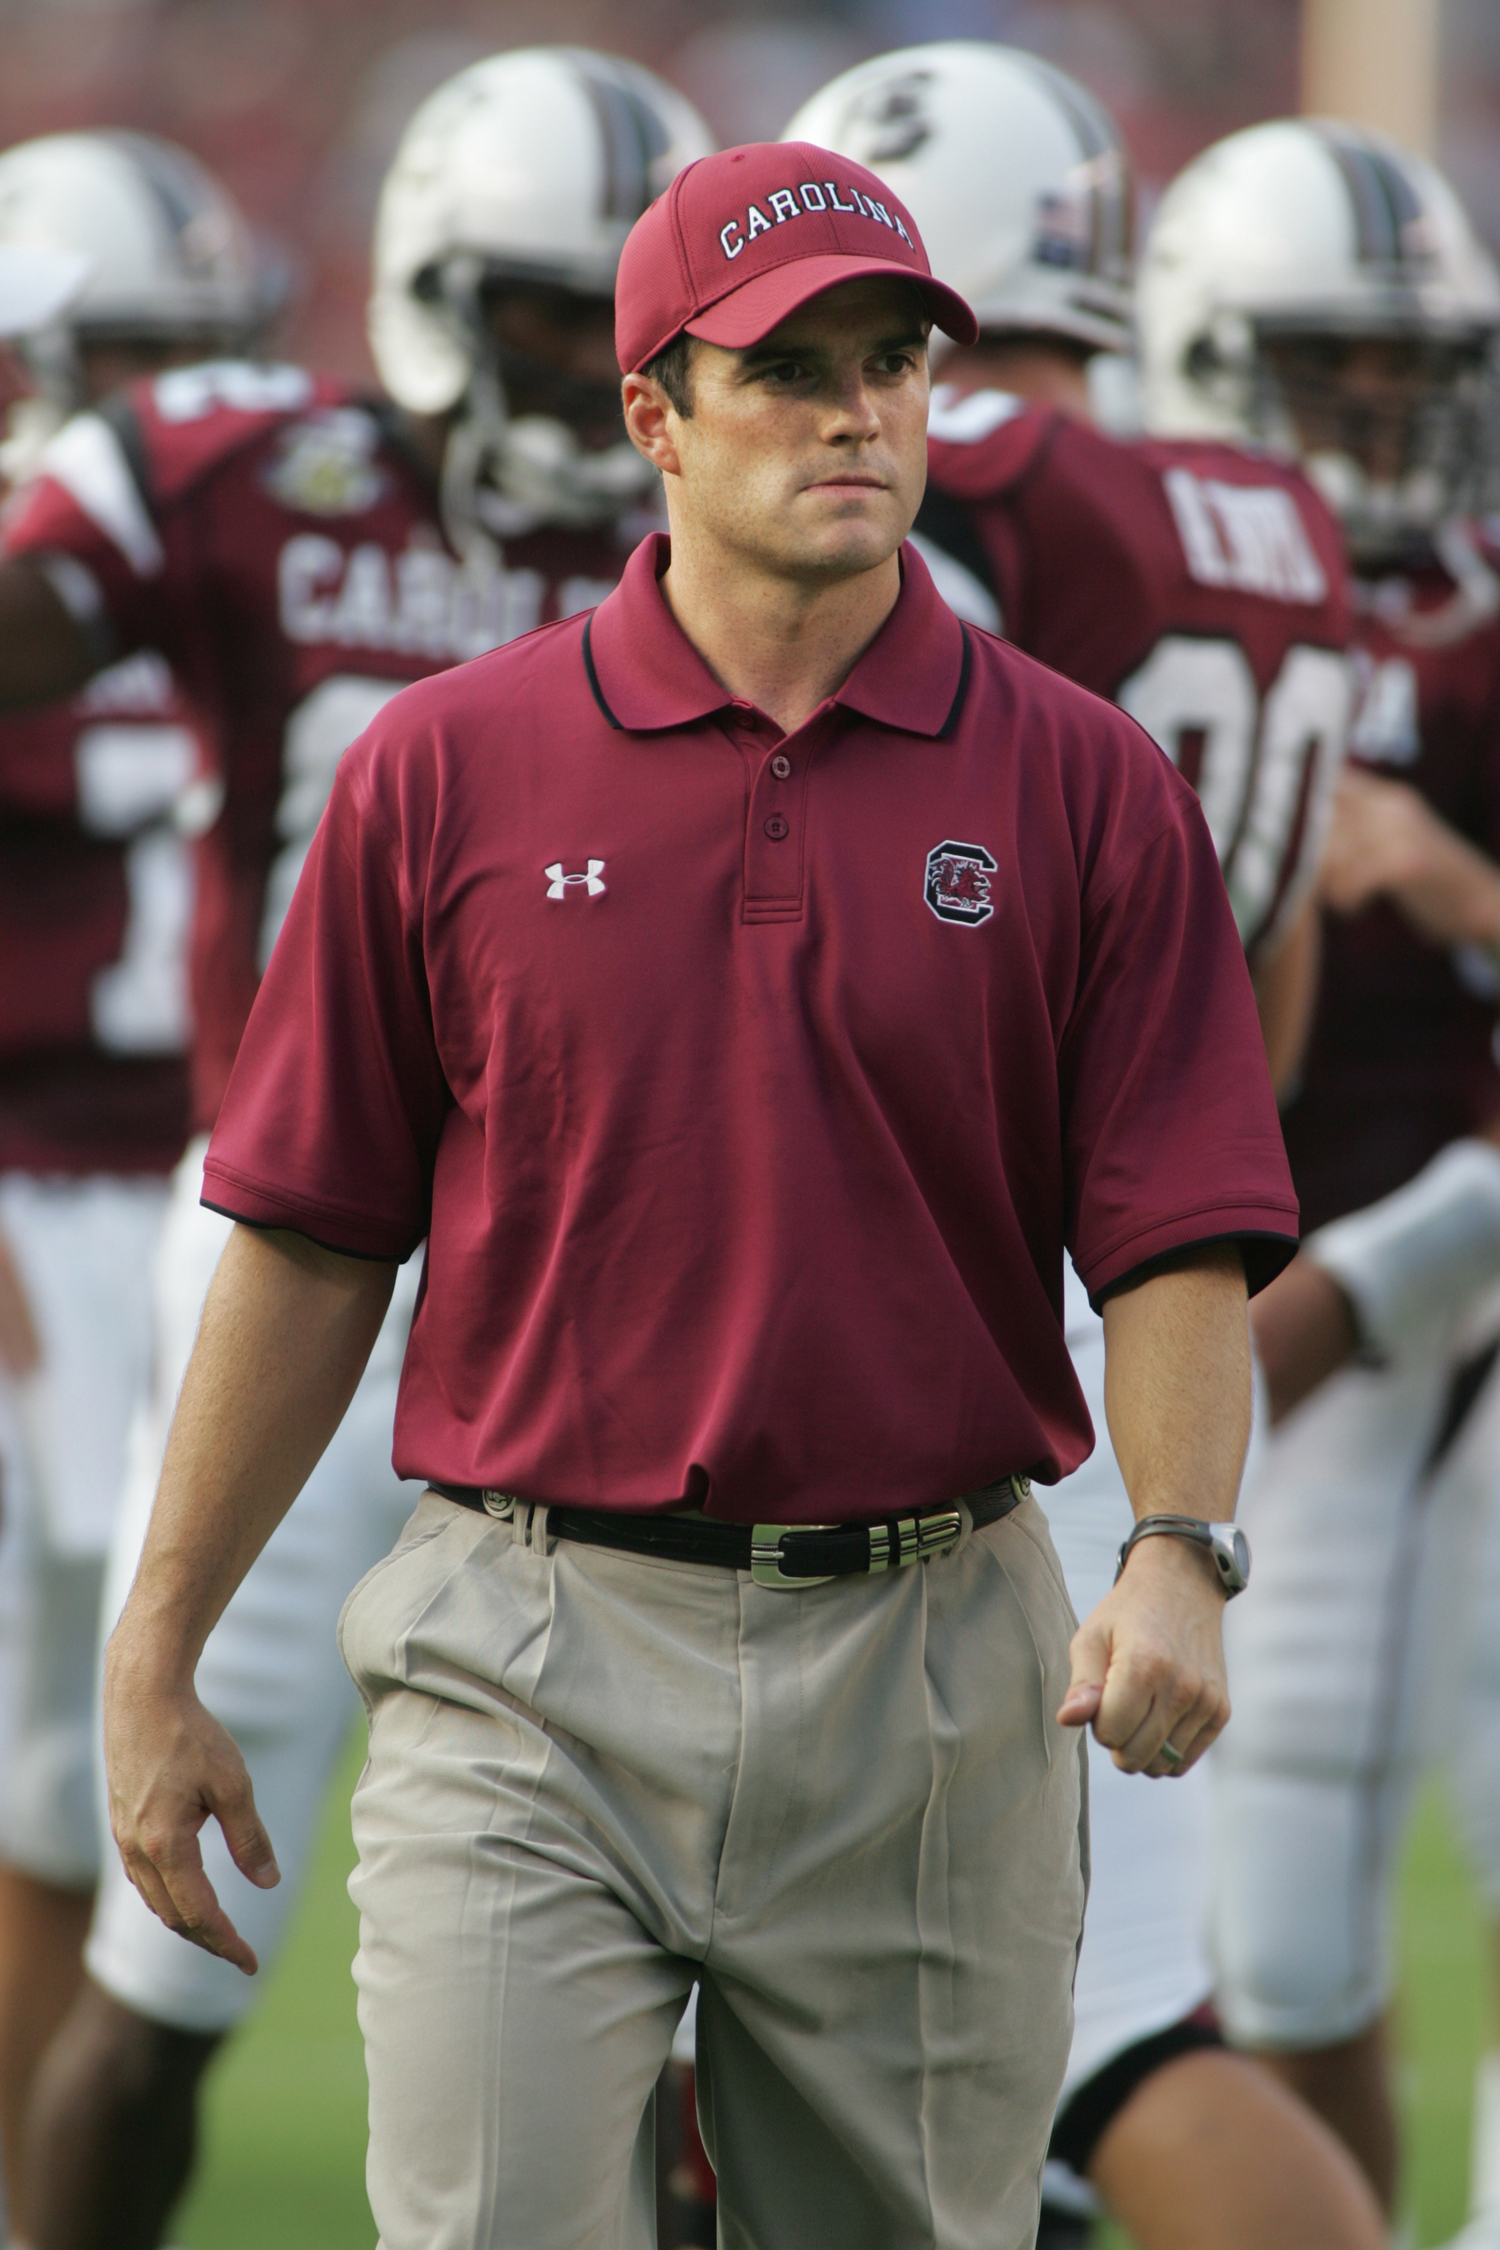  In 2006, just after being married, Shane became the assistant coach at the University of South Carolina under Coach Steve Spurrier. The Beamers spent four wonderful years in Columbia.  Following this they left for Virginia, where Shane enjoyed a once-in-a-lifetime-role with his father at Virginia Tech in 2011.
